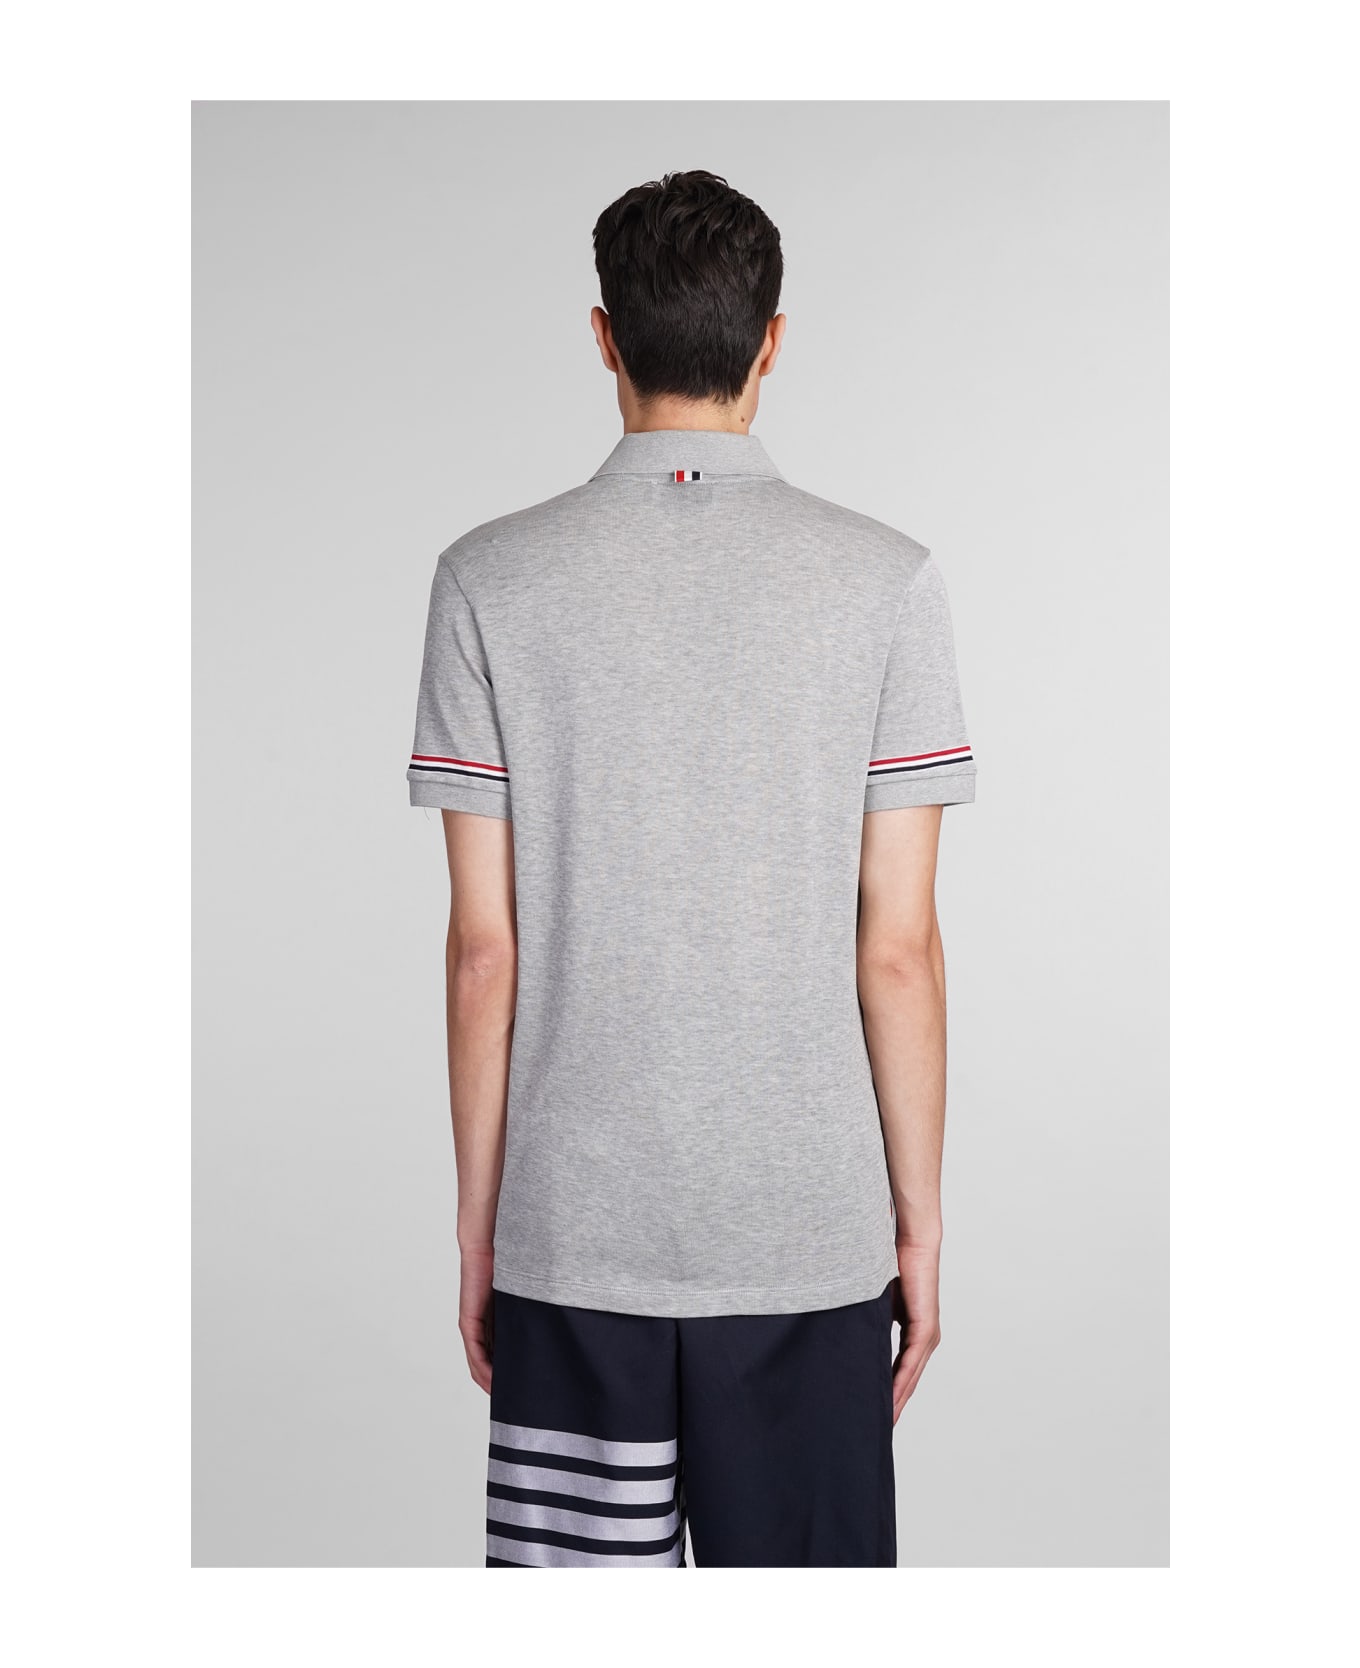 Thom Browne Polo In Grey Cotton - grey ポロシャツ